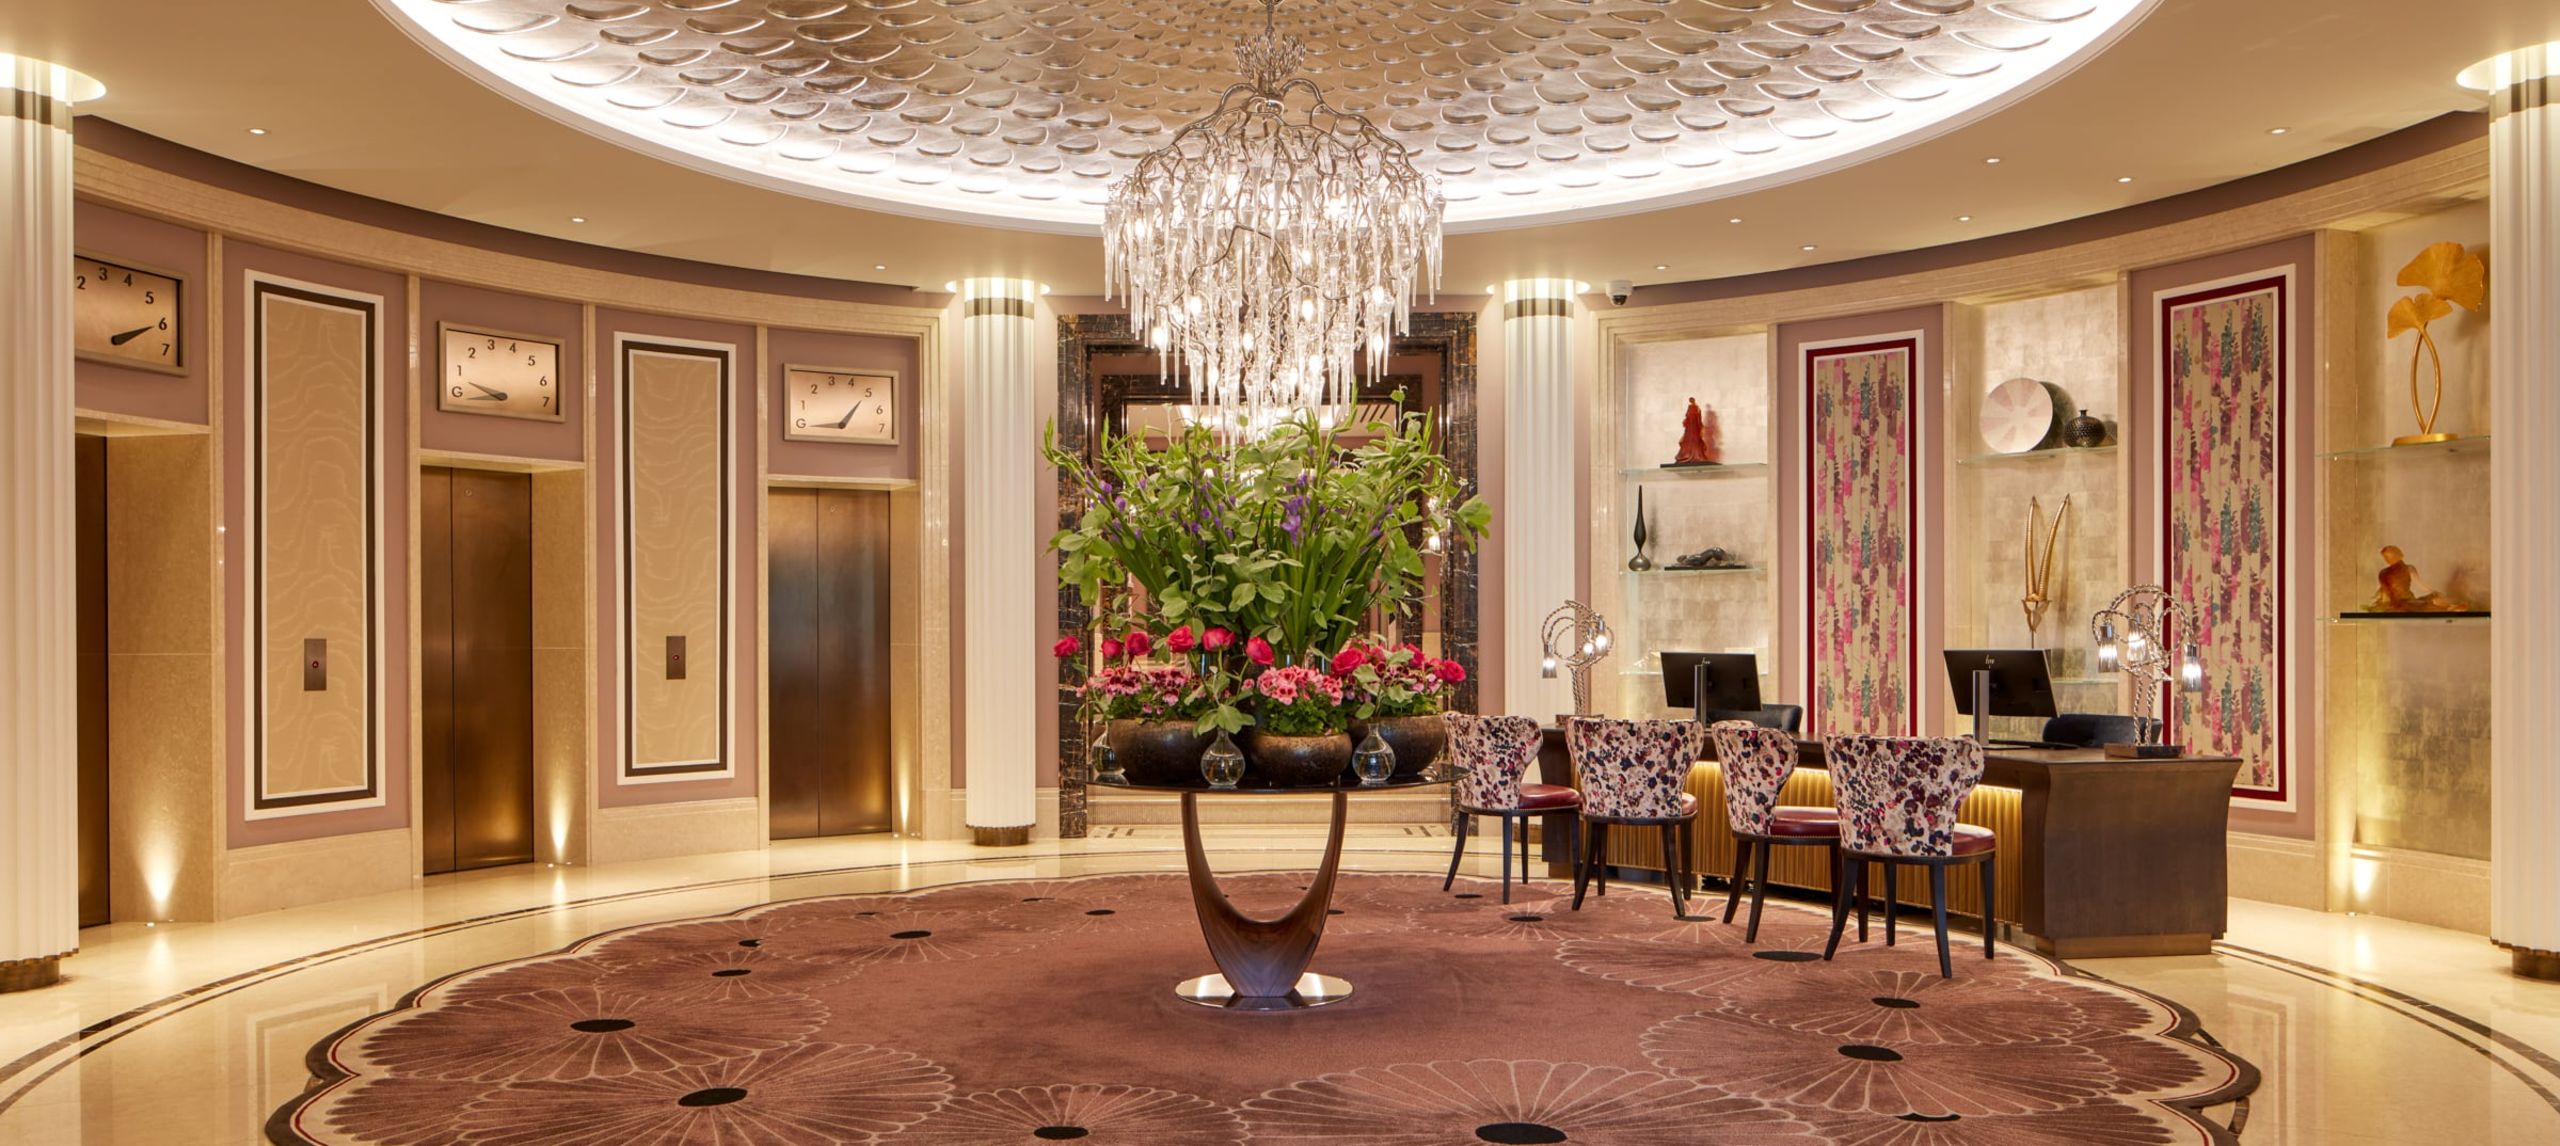 View of the lobby with crystal chandelier and luxury décor.